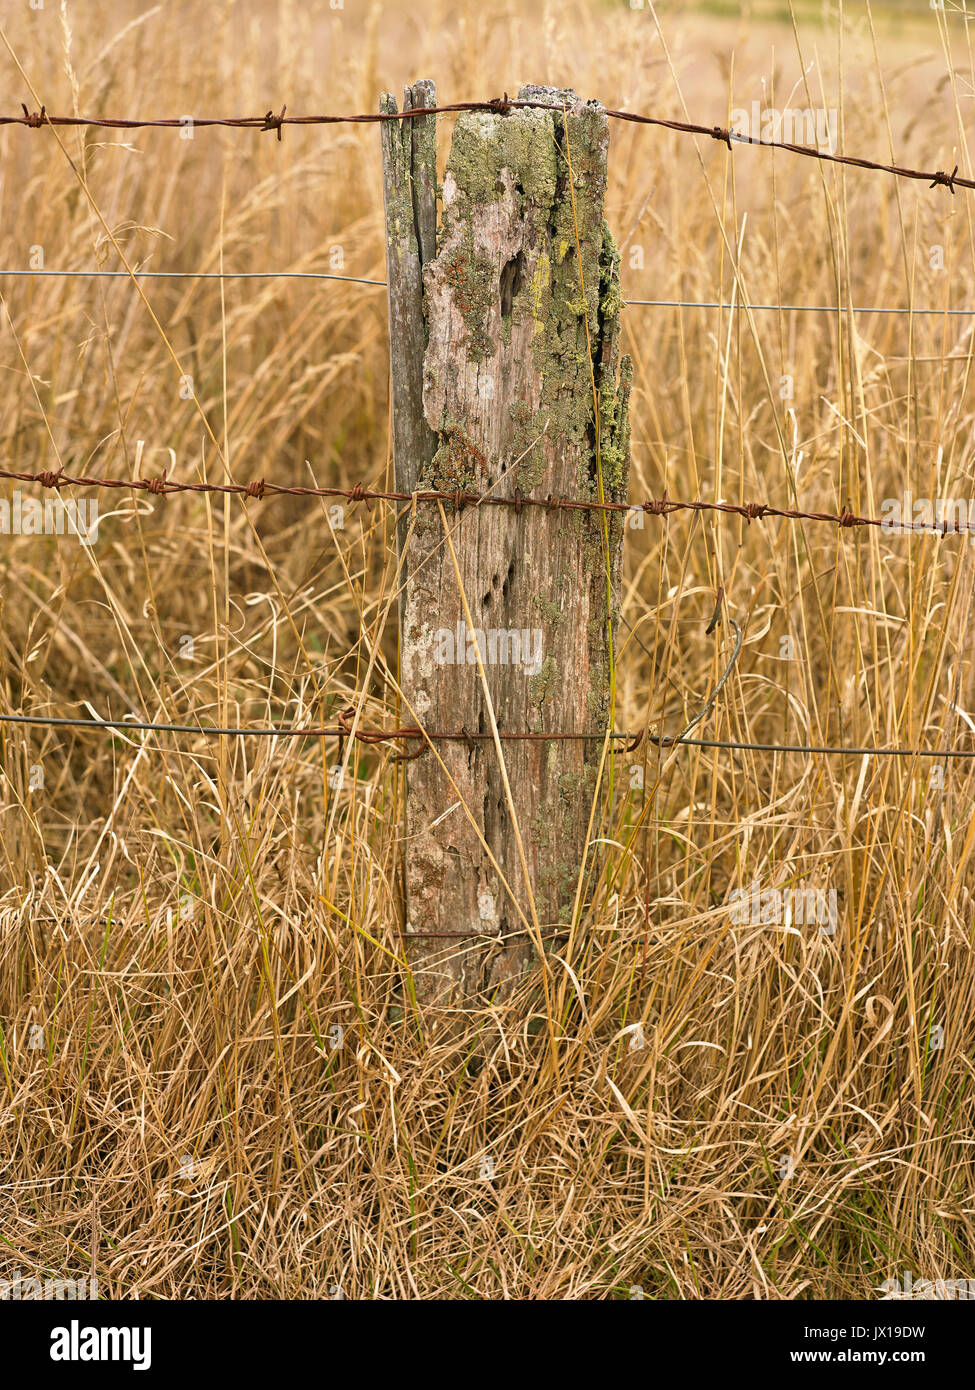 Worn fencing and battens Stock Photo